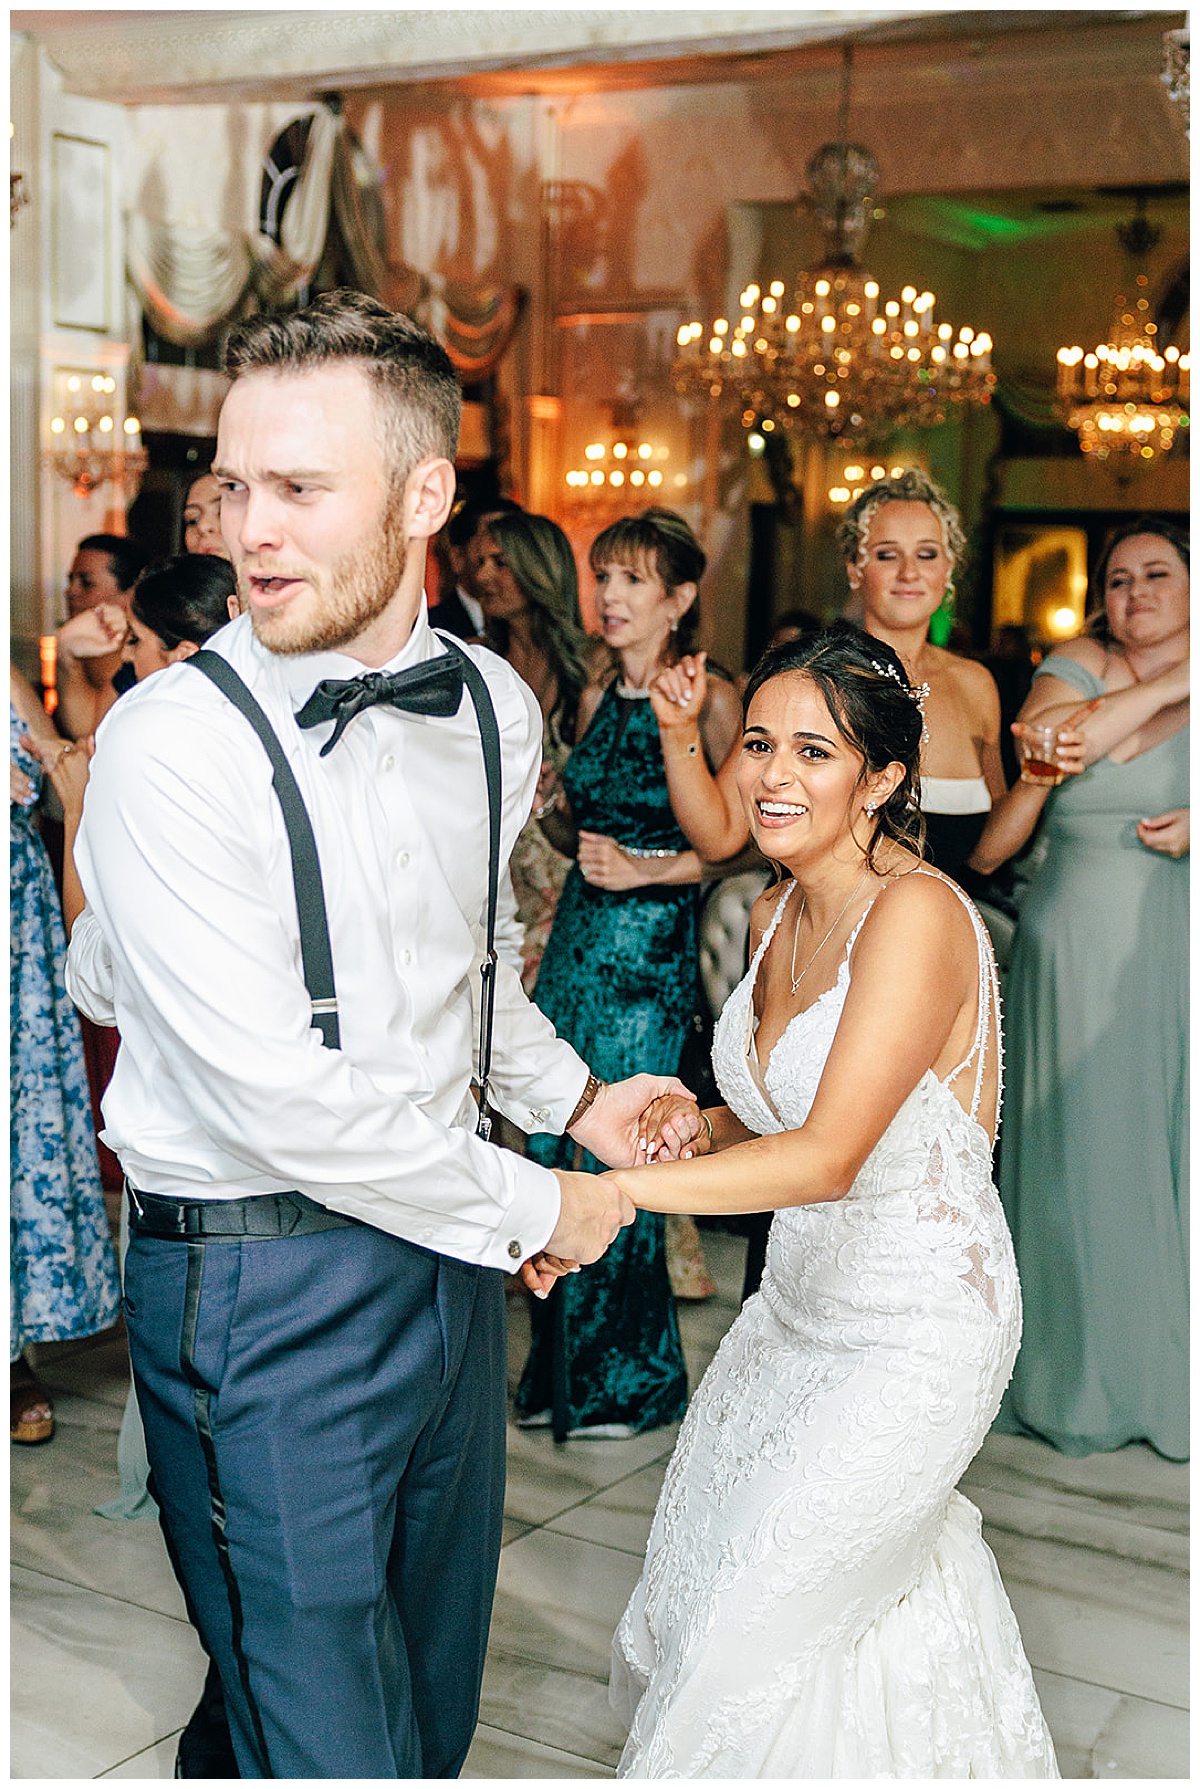 Couple dance together at Giorgio's Baiting Hollow